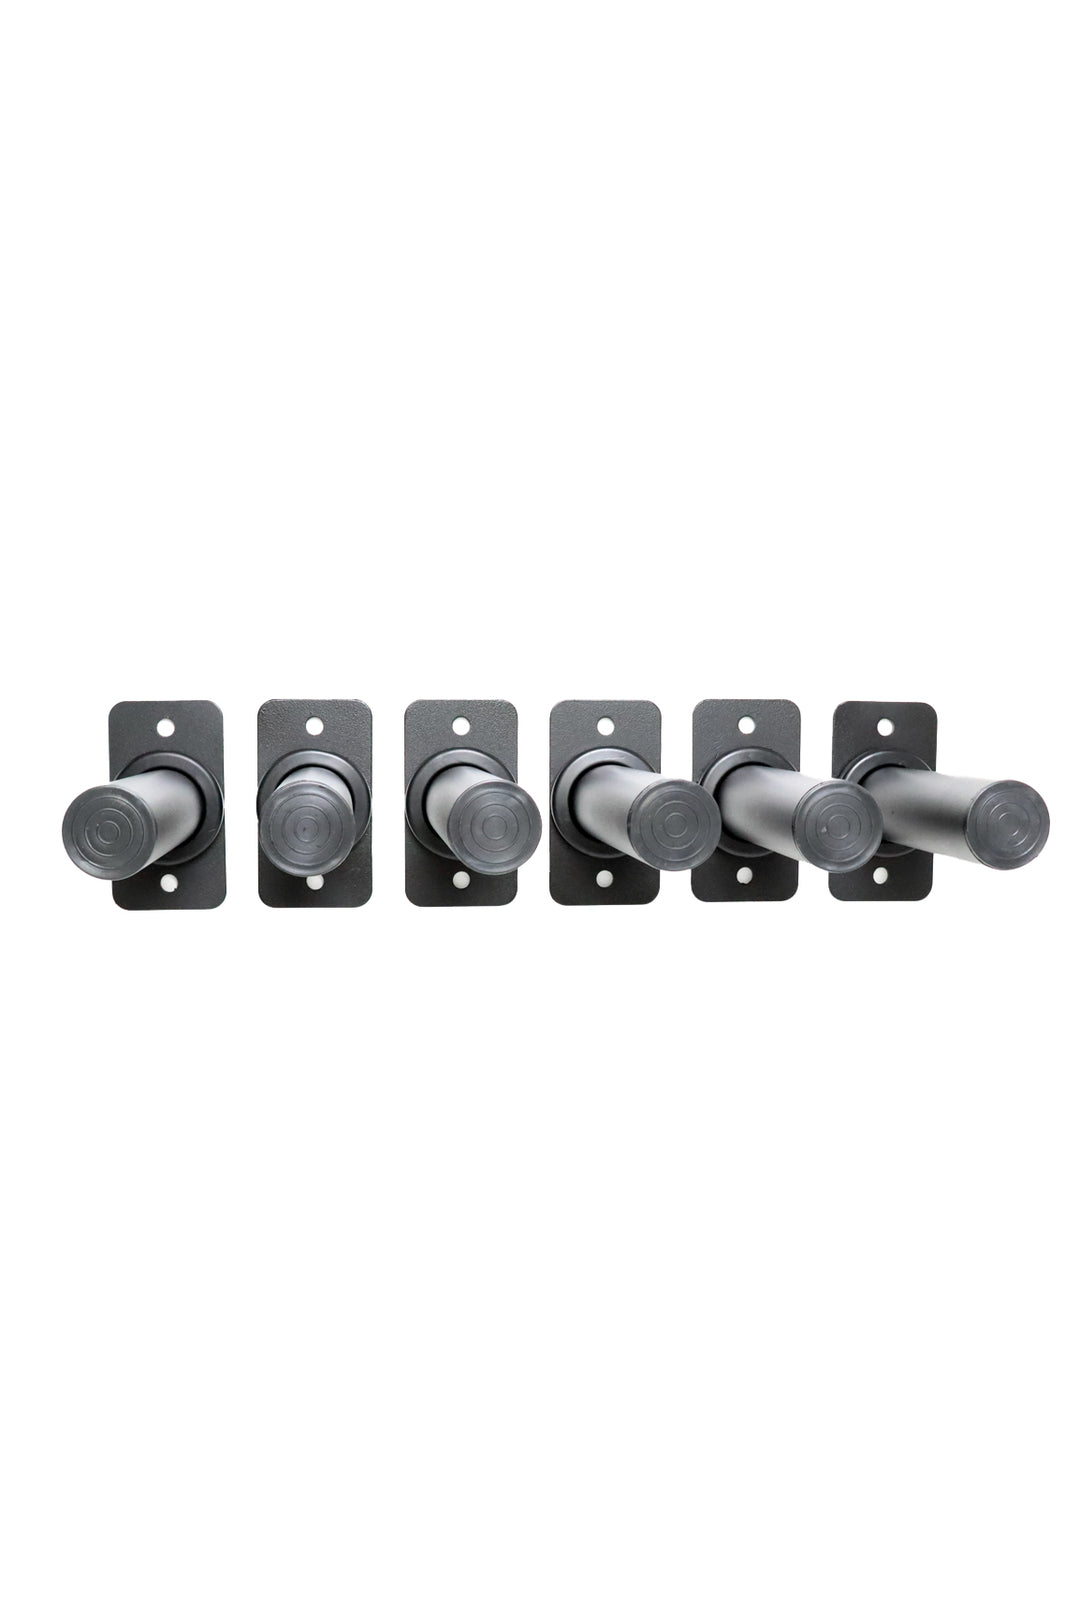 Next Fitness Wall Mounted Weight / Barbell Storage